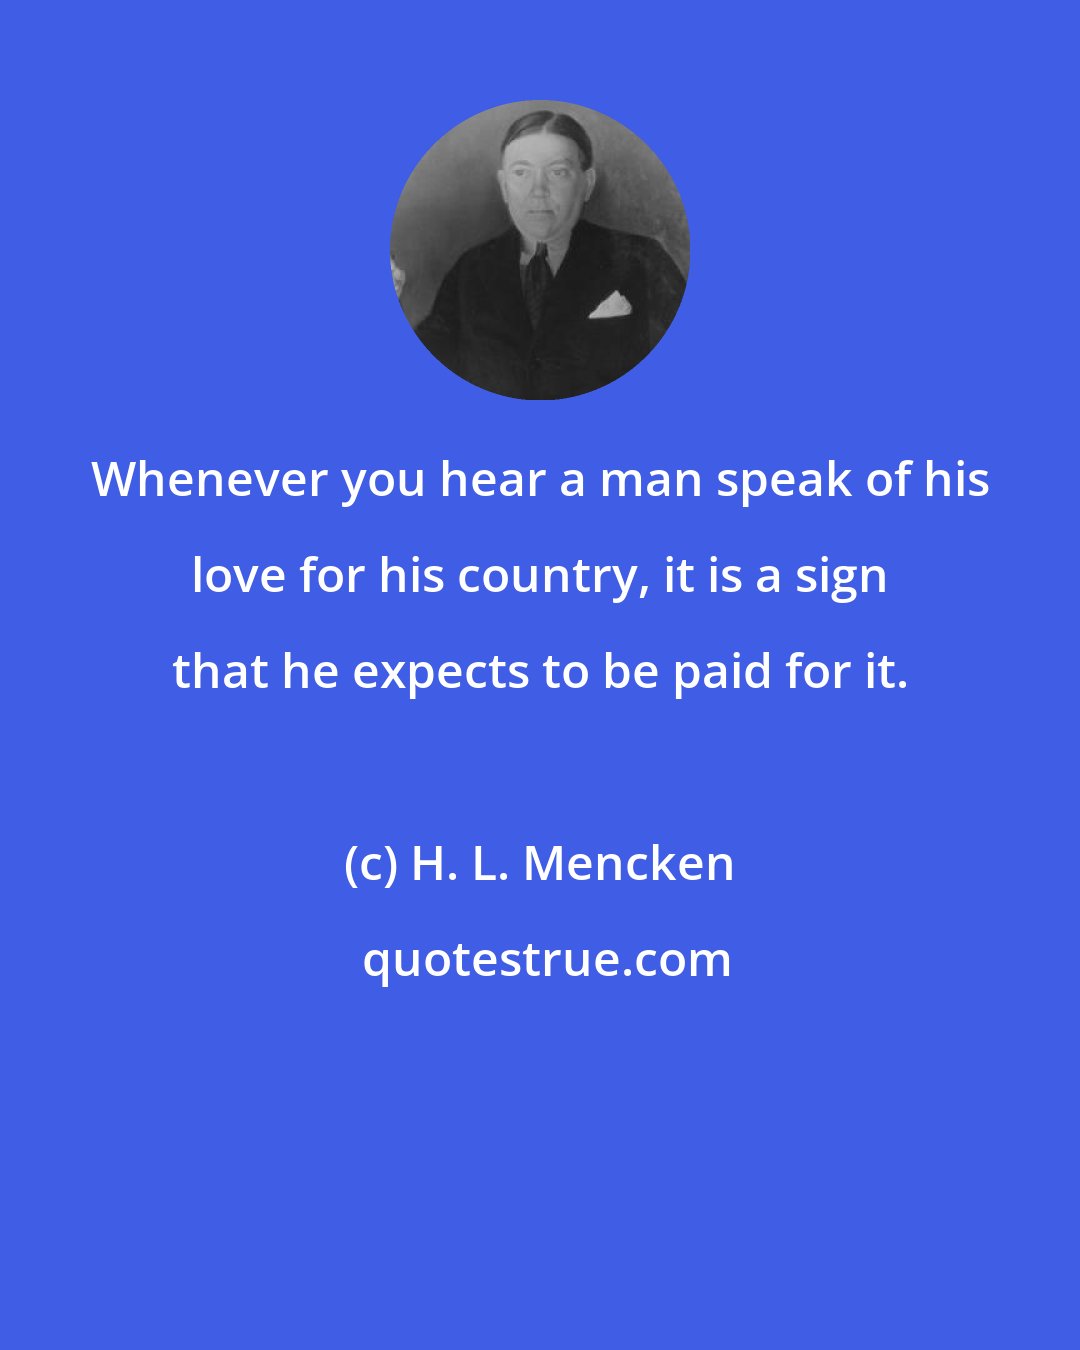 H. L. Mencken: Whenever you hear a man speak of his love for his country, it is a sign that he expects to be paid for it.